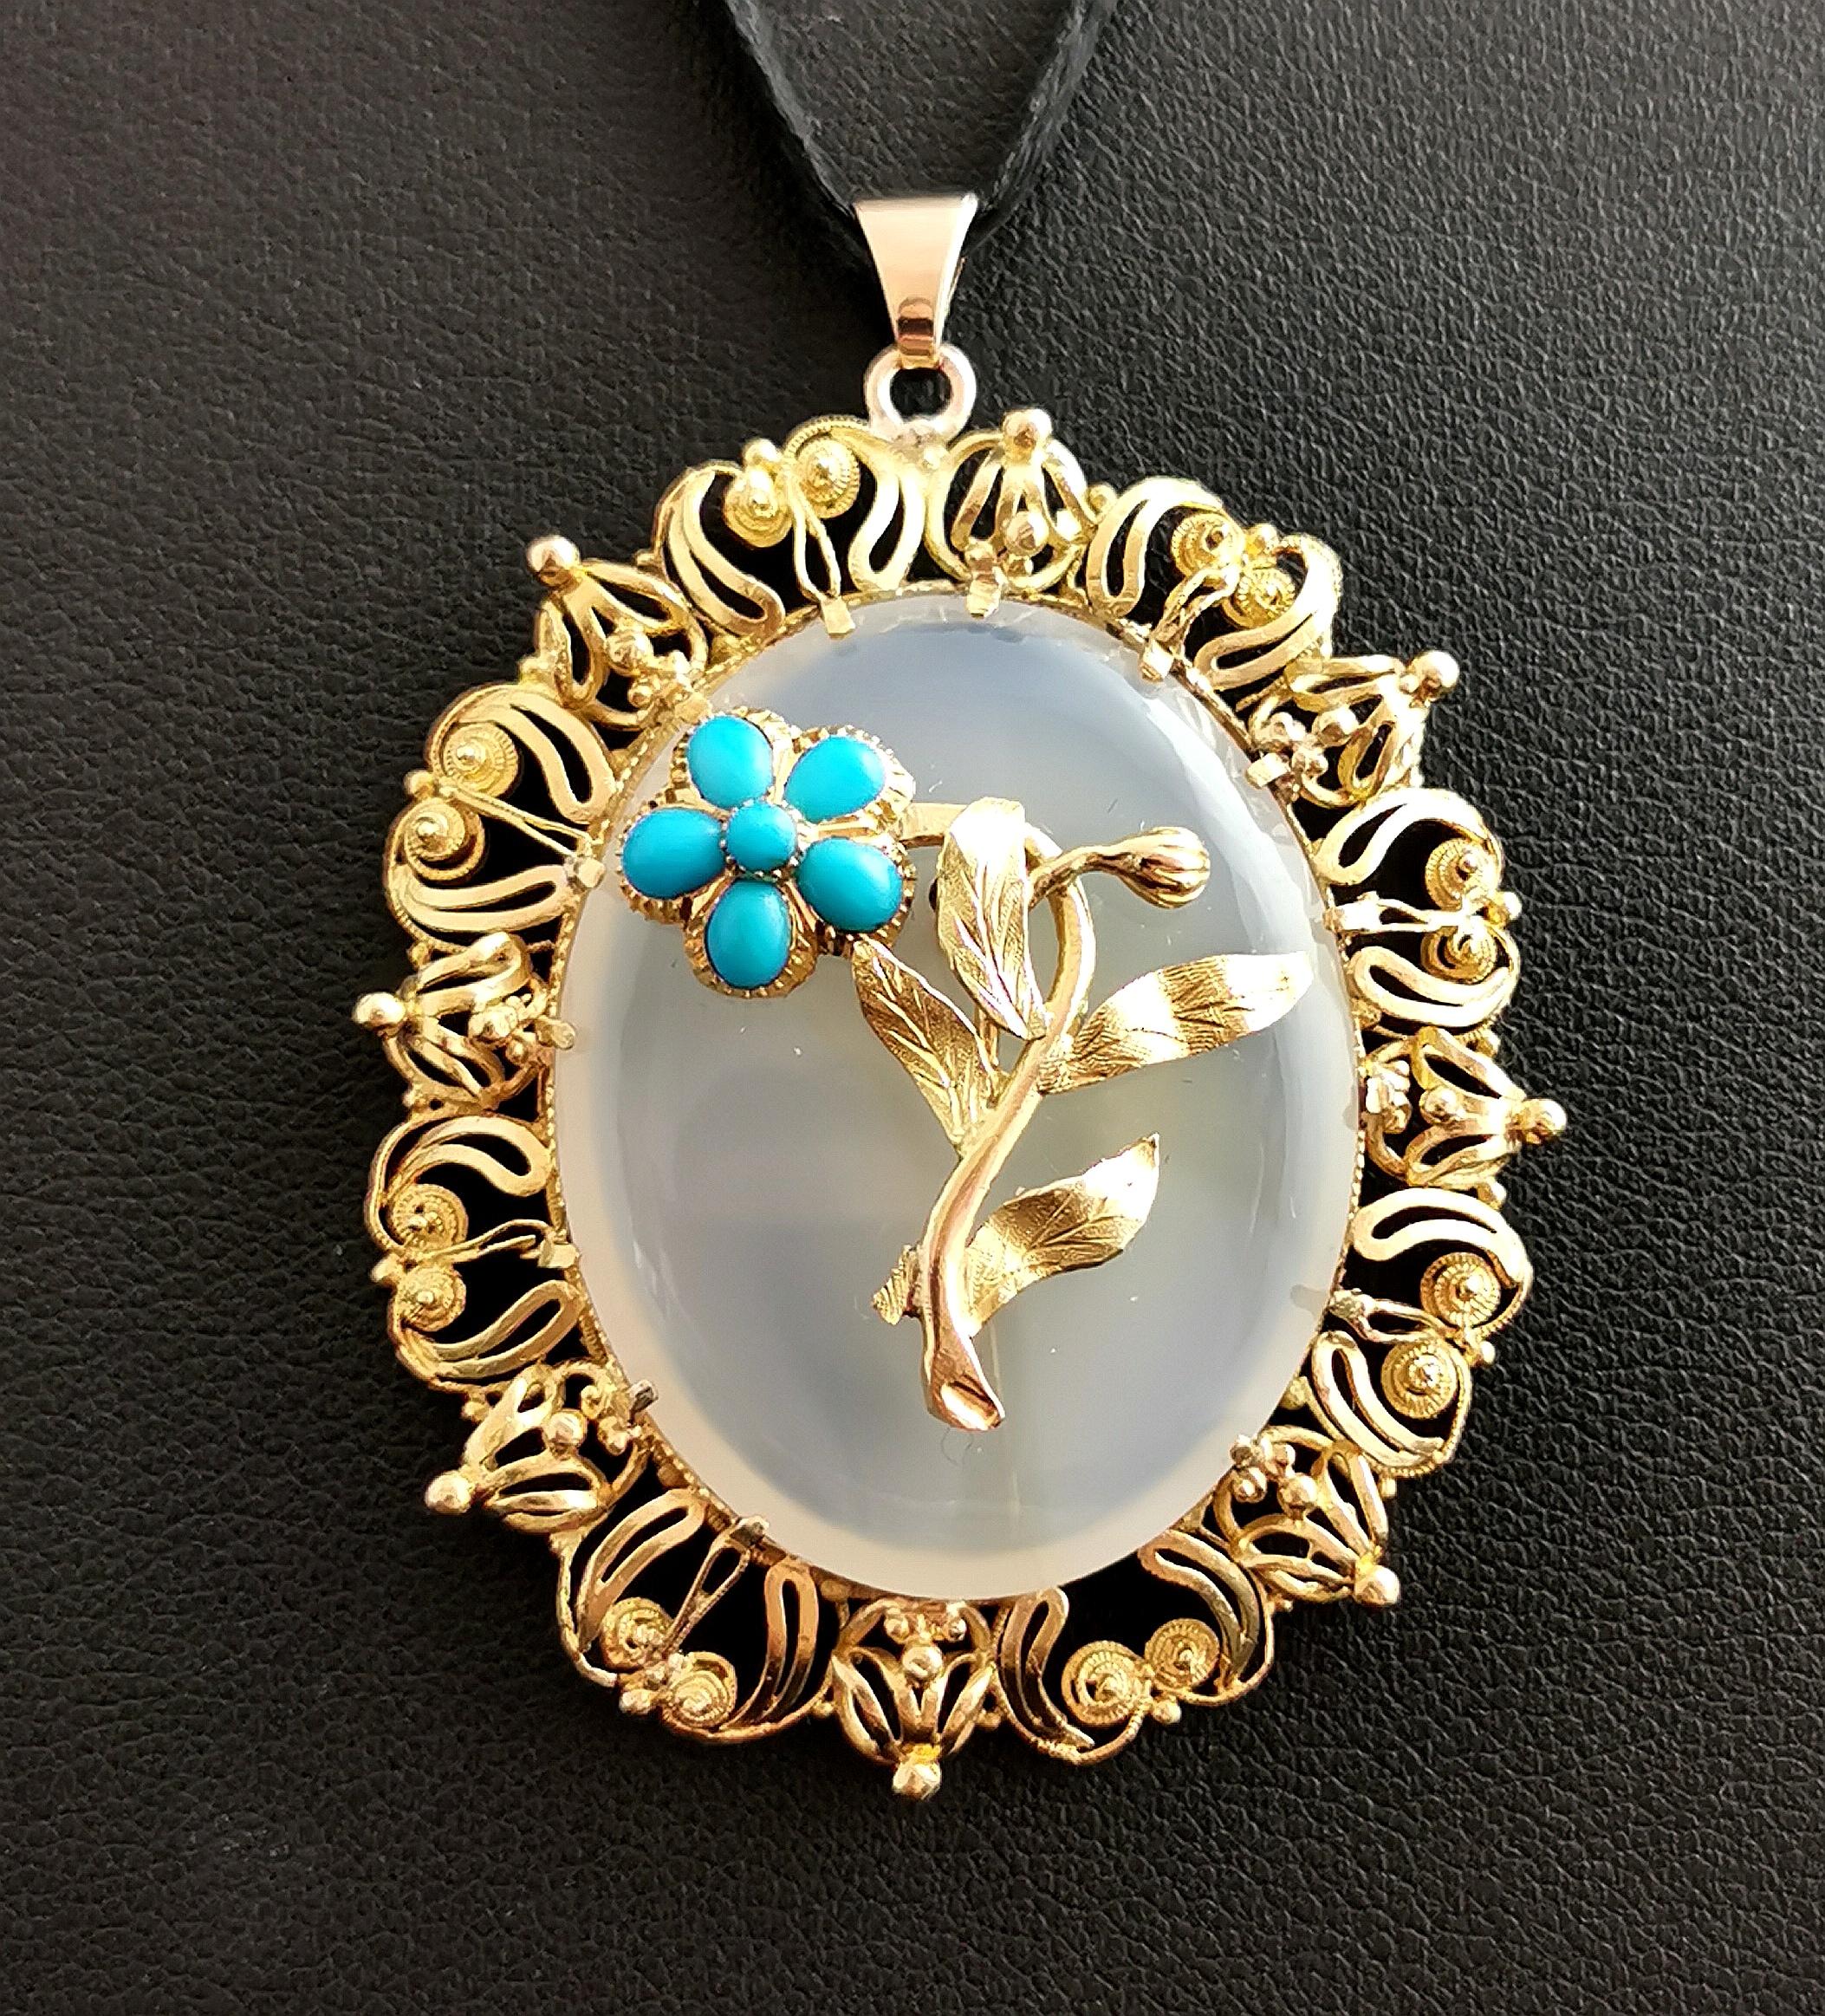 A beautiful antique Victorian era chalcedony and turquoise pendant.

It is an oval shaped pendant, the cool white chalcedony claw mounted into an elaborate 18kt yellow gold frame with wirework and scroll work.

The chalcedony has a pretty yellow